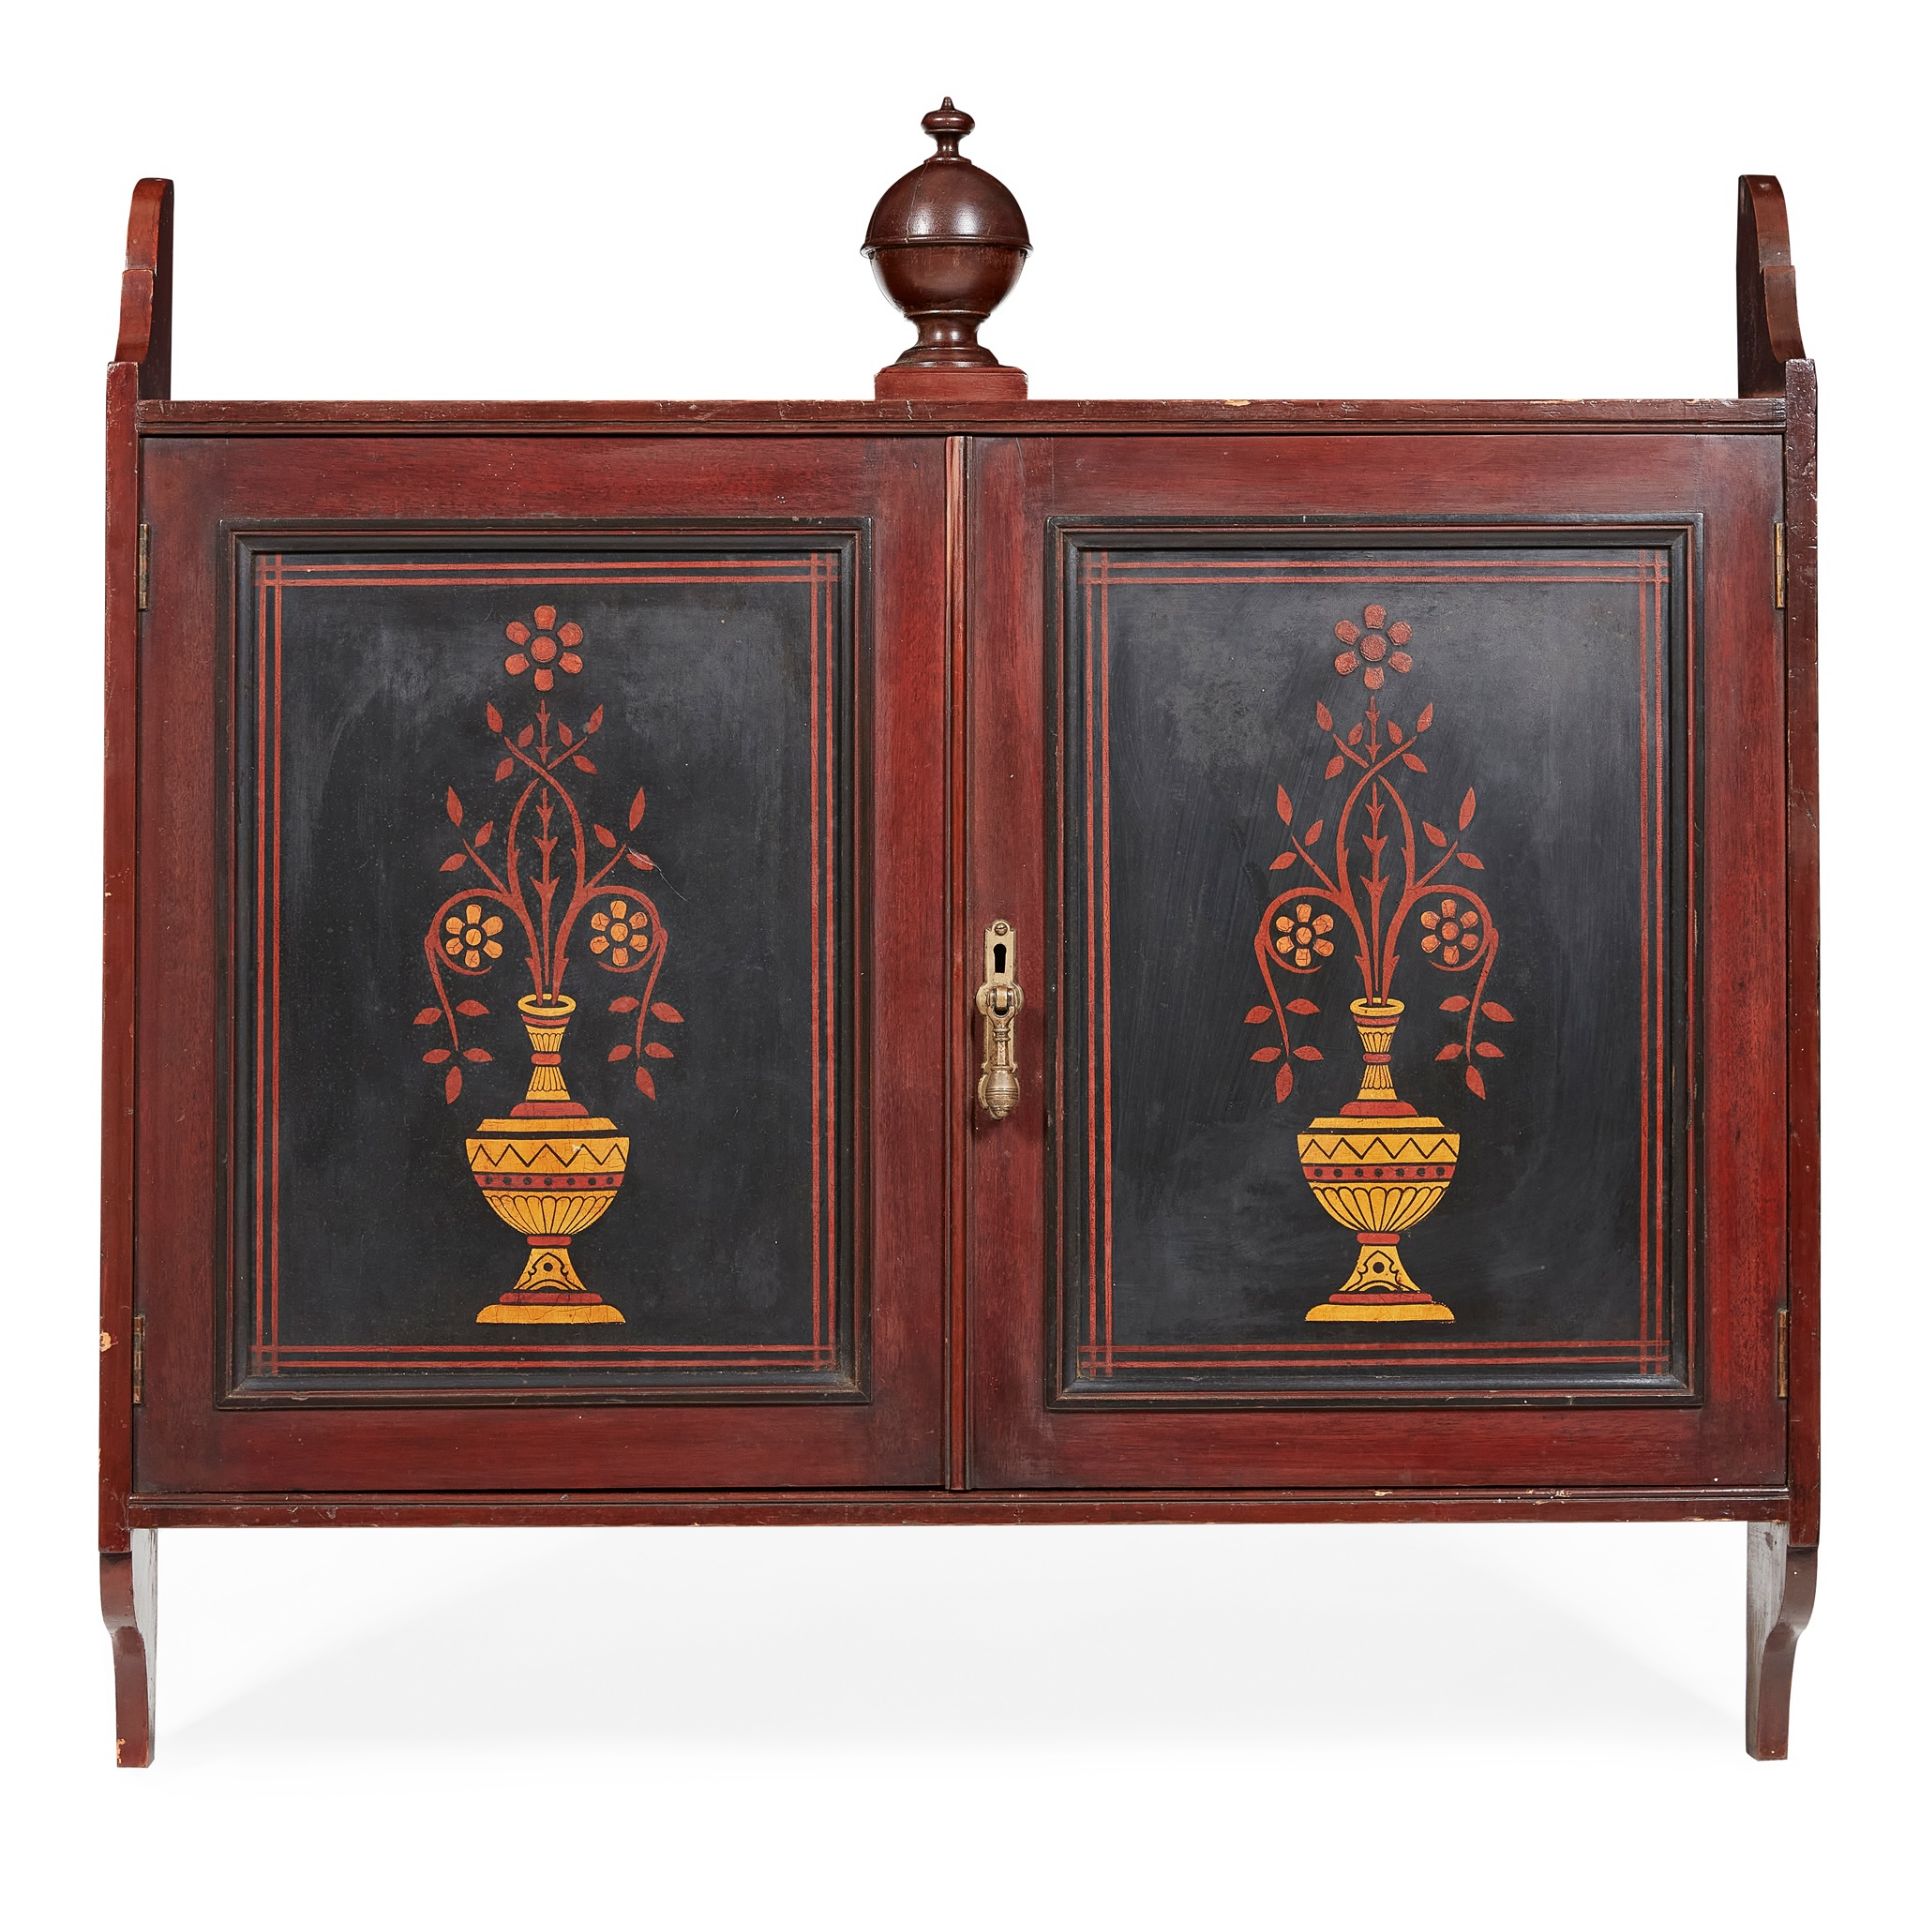 MANNER OF COTTIER & CO. AESTHETIC MOVEMENT WALL CABINET, CIRCA 1890